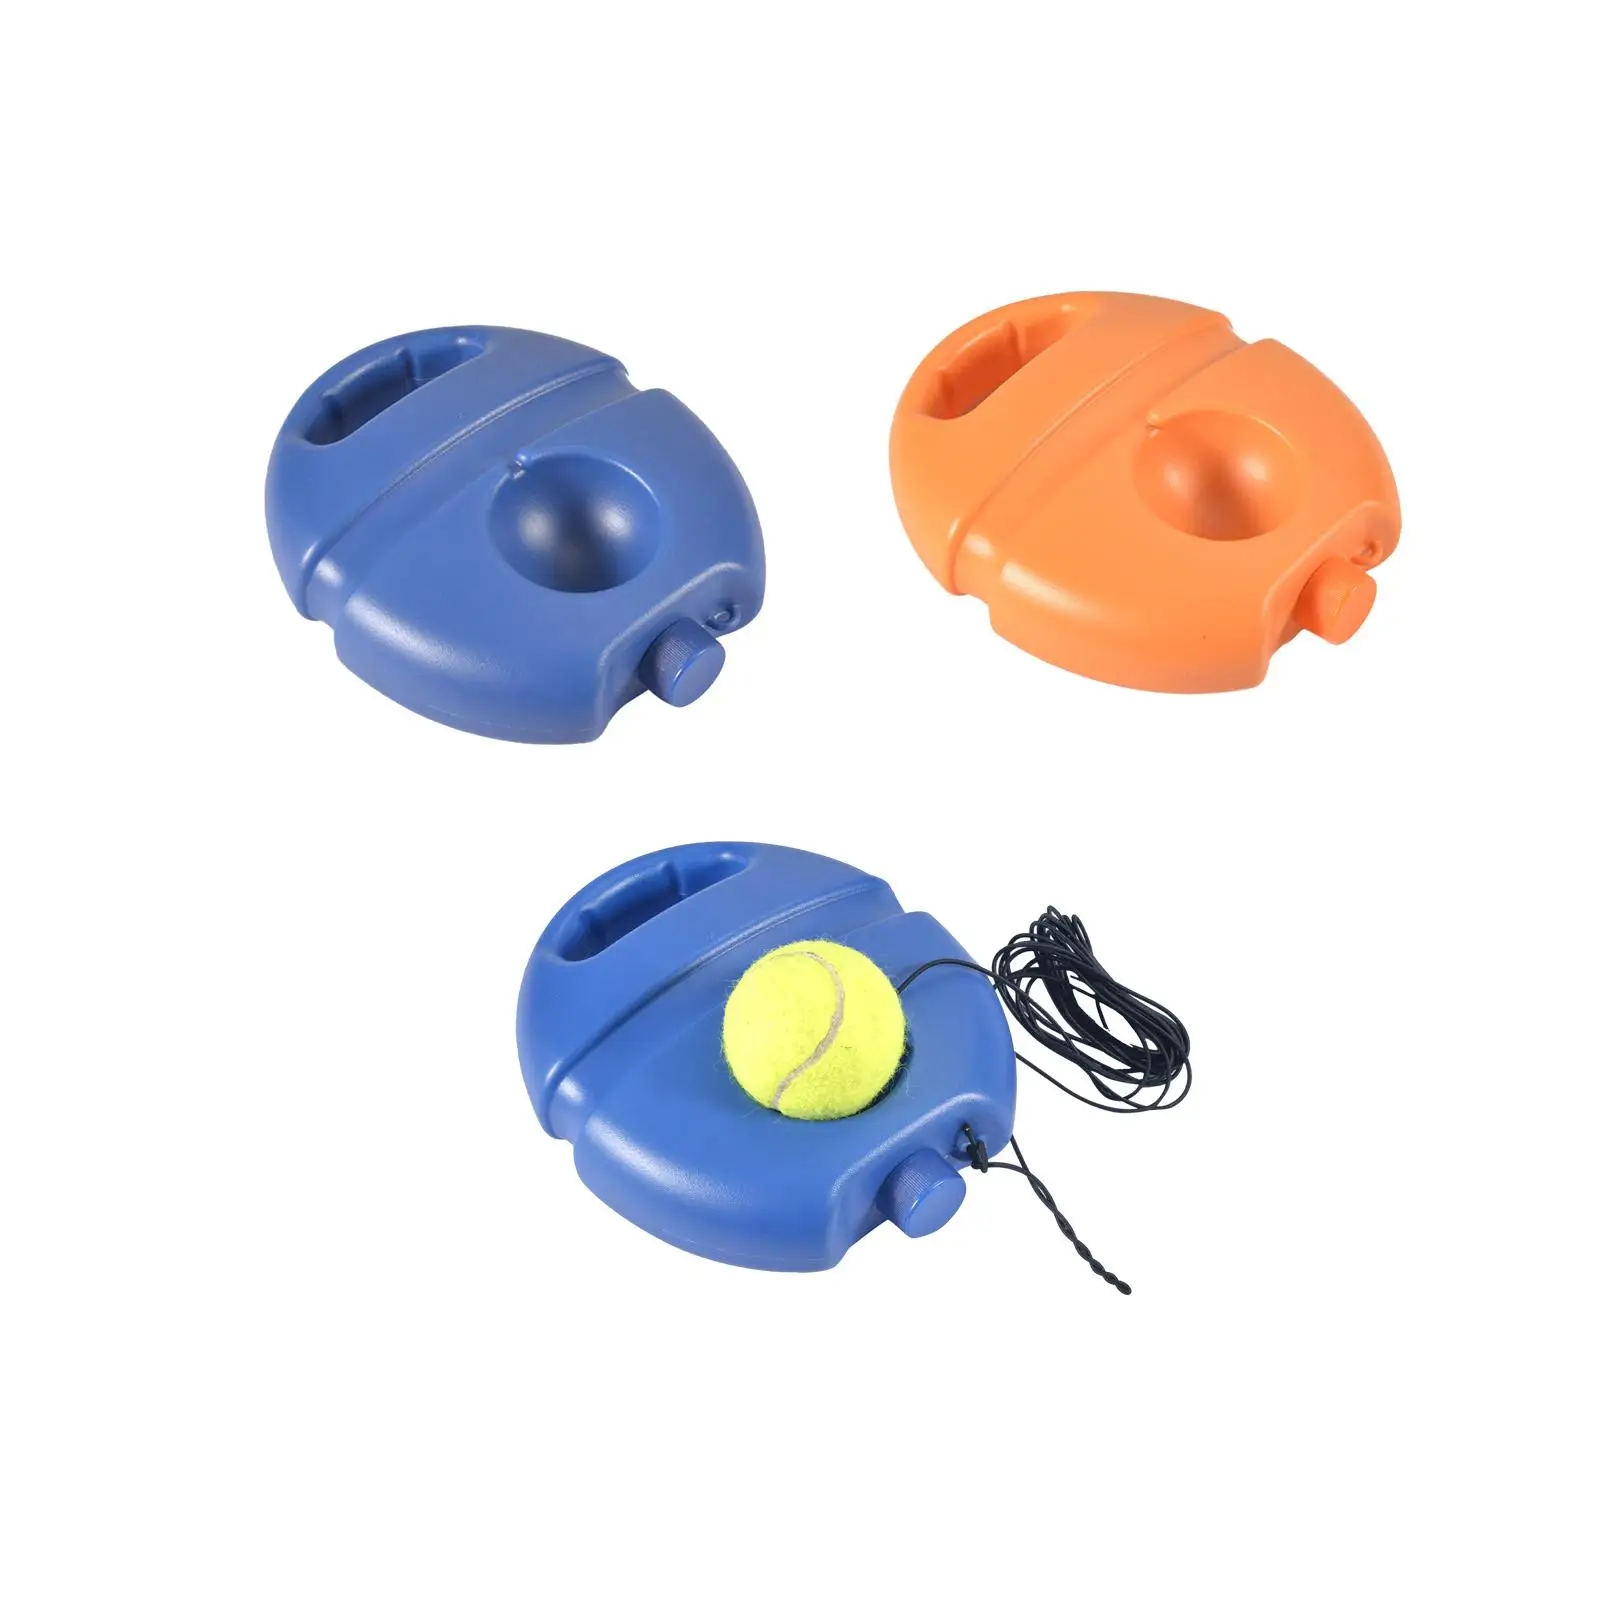 Tennis Trainer Base Tennis Training Equipment Pickleball Trainer Solo Tennis Trainer for Beginners Sports Outdoor Exercise Tool